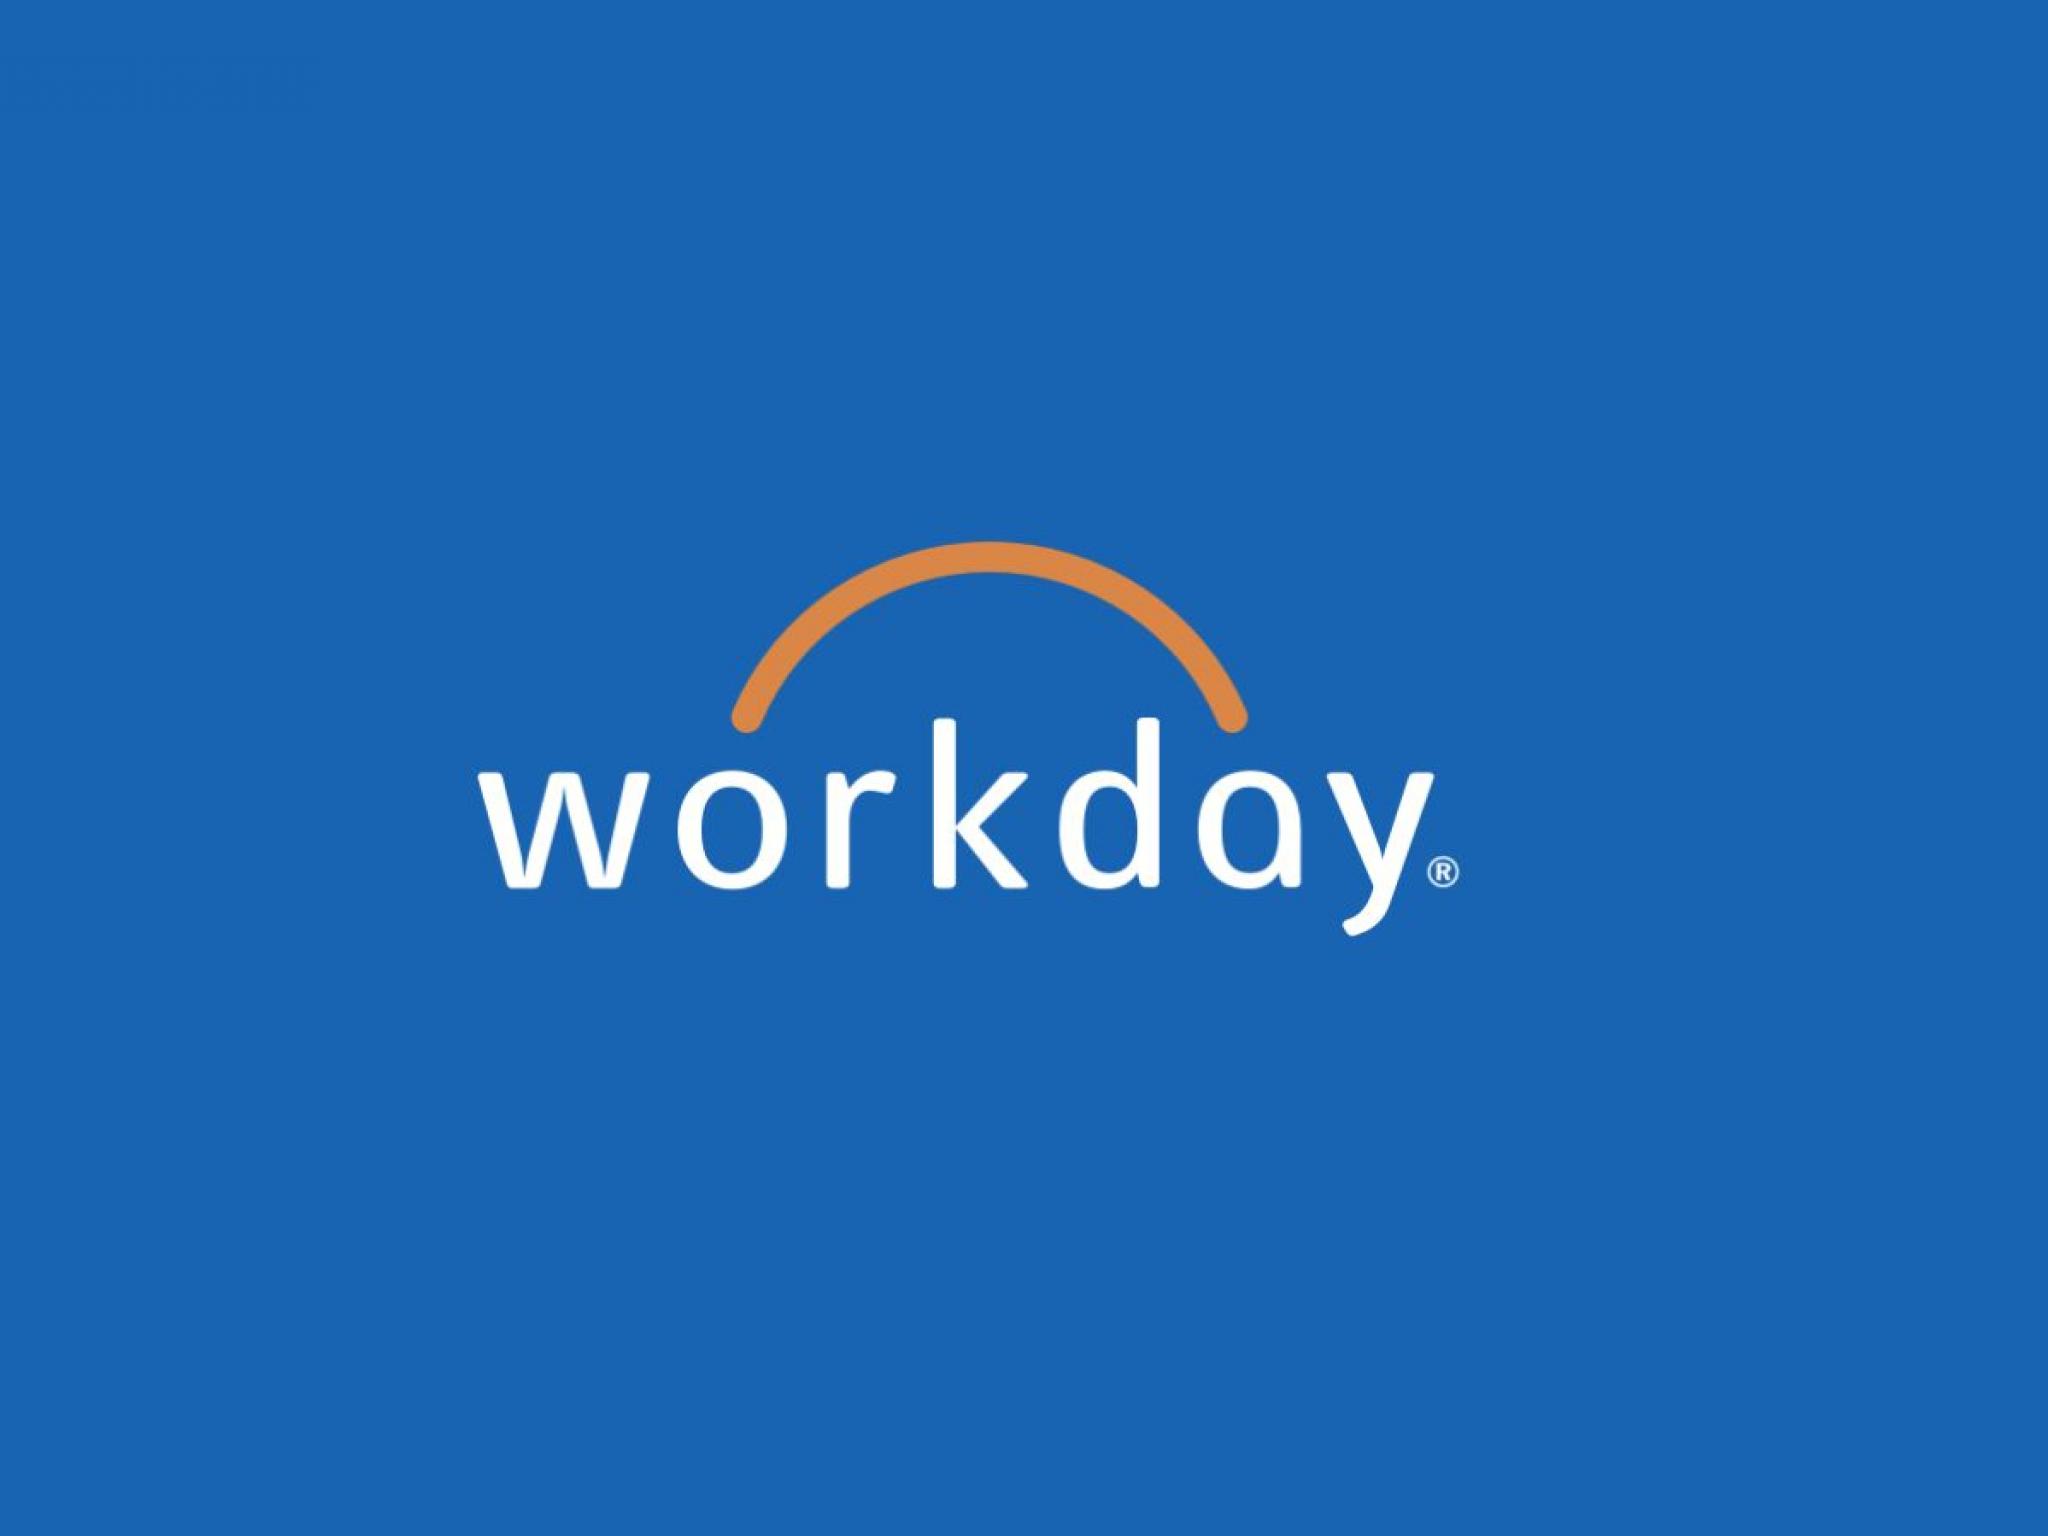  workday-alaska-air-and-2-other-stocks-insiders-are-selling 